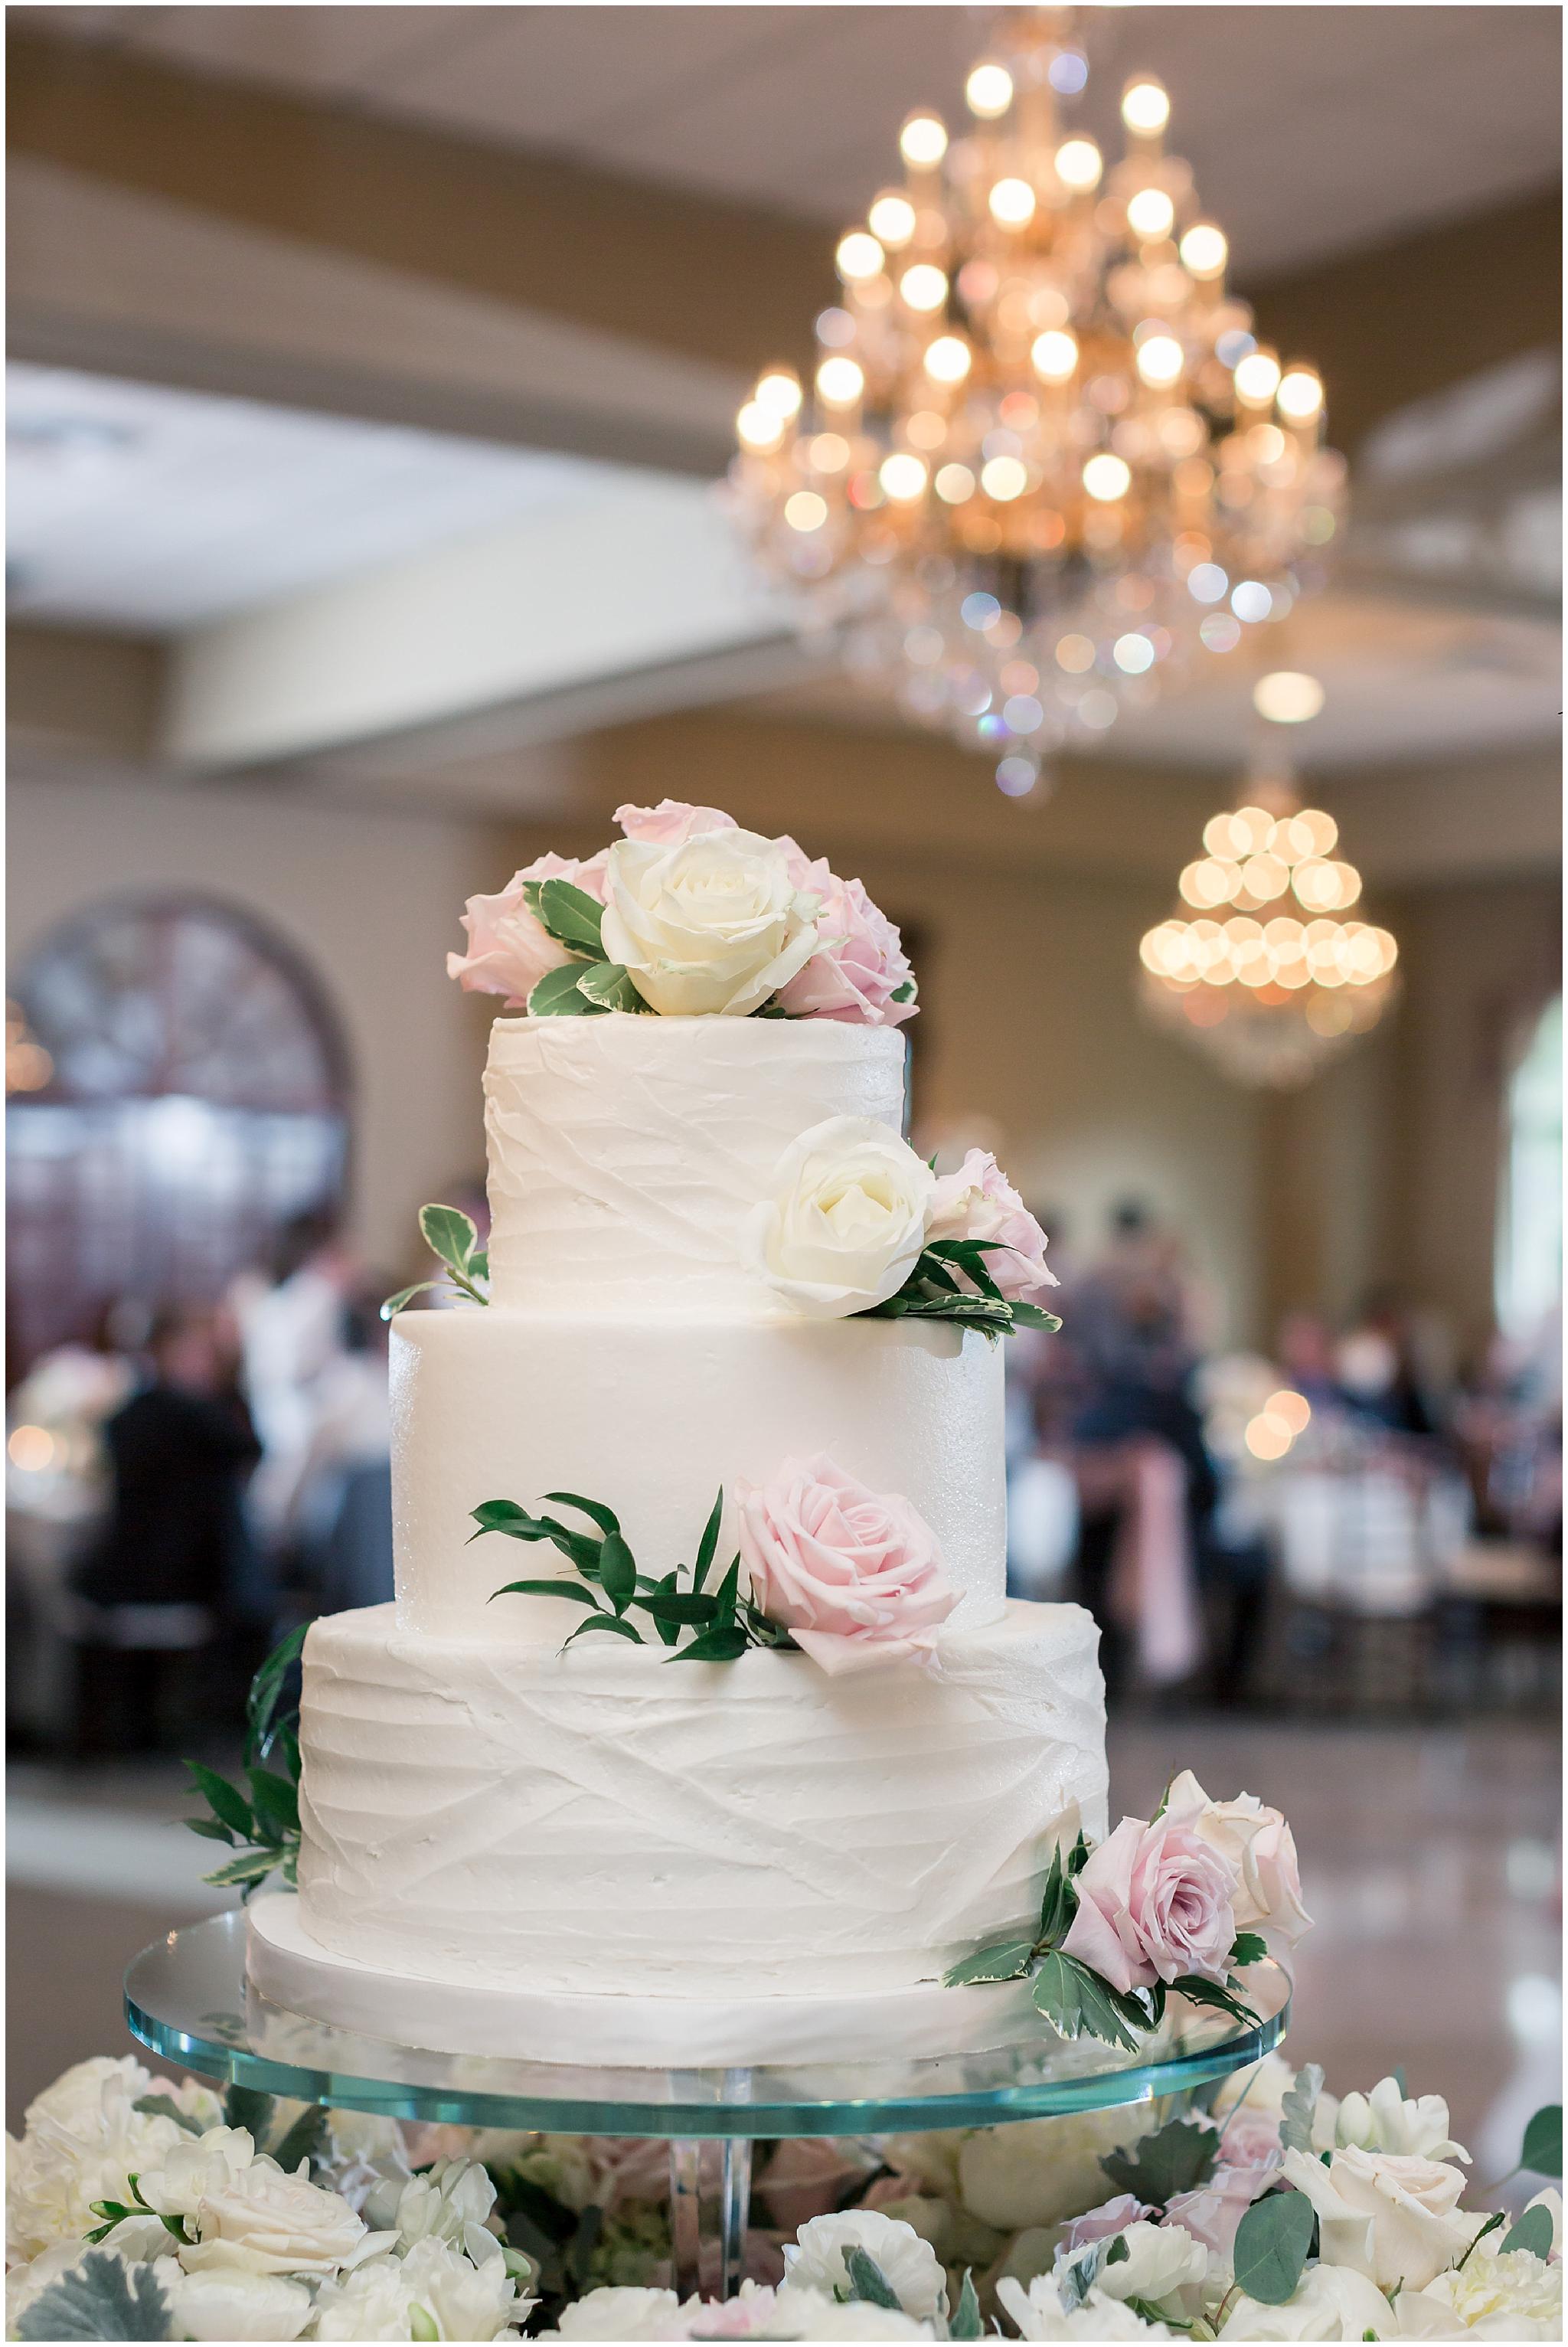 The Tate House Wedding Cake Pictures